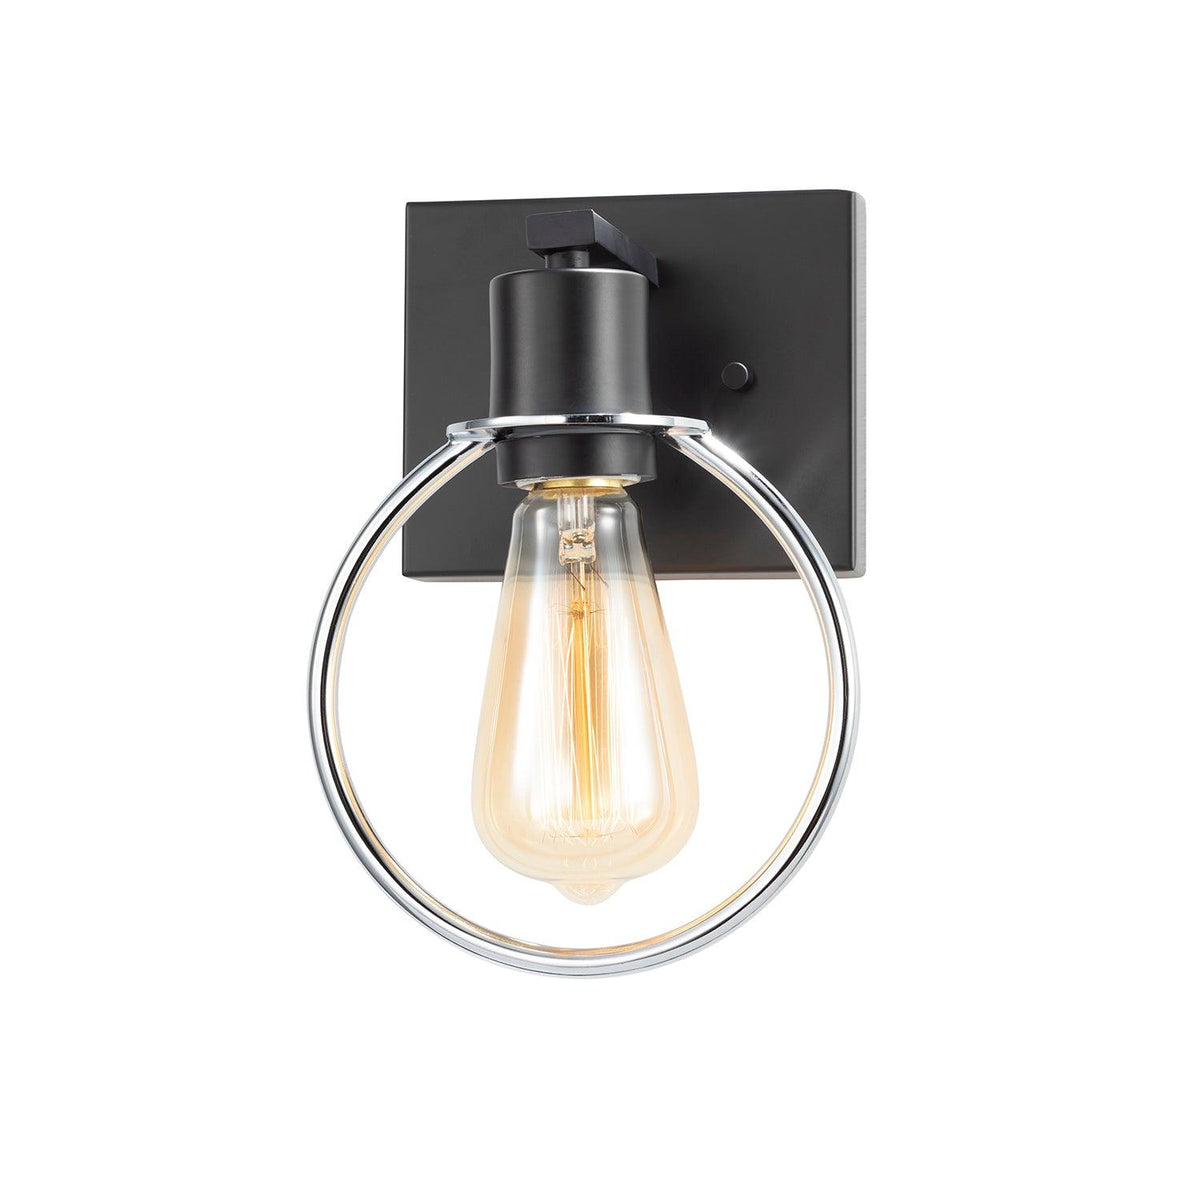 Justice Designs - Volta Wall Sconce - NSH-8901-MBBR | Montreal Lighting & Hardware